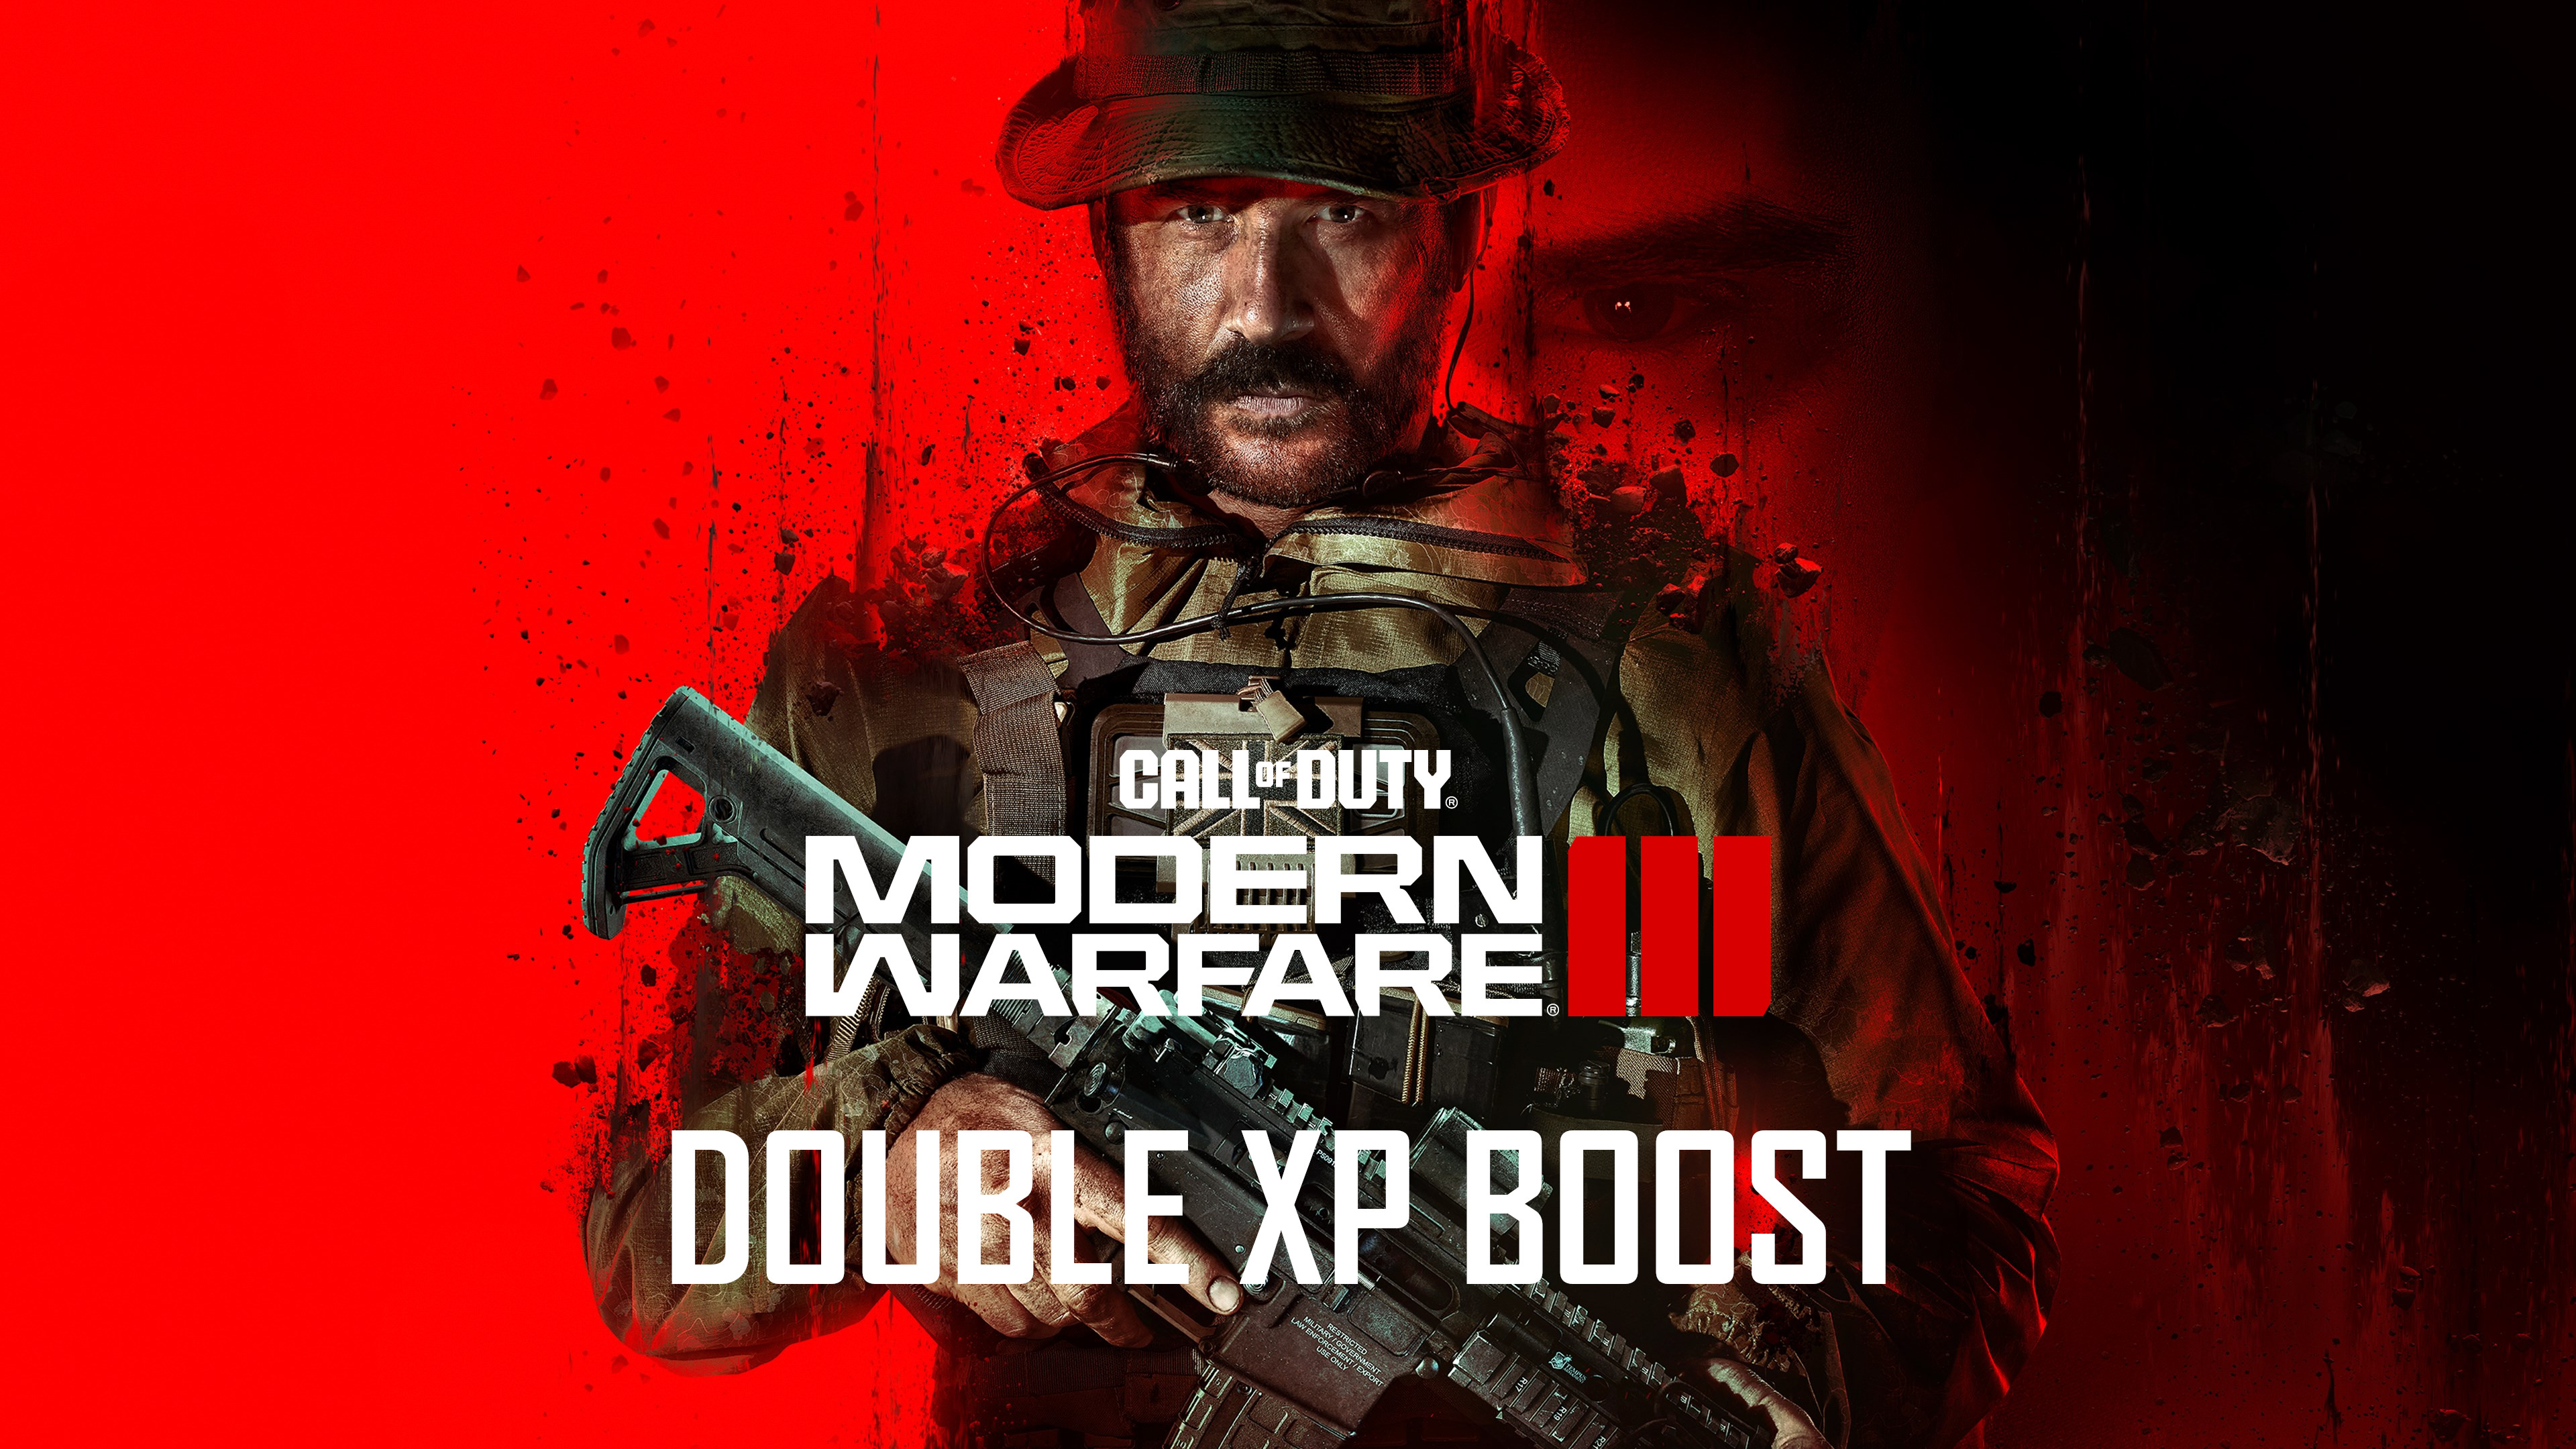 Call Of Duty: Modern Warfare III / Warzone 2 - 1 Hour Double XP Boost PC/PS4/PS5/XBOX One/Series X,S CD Key